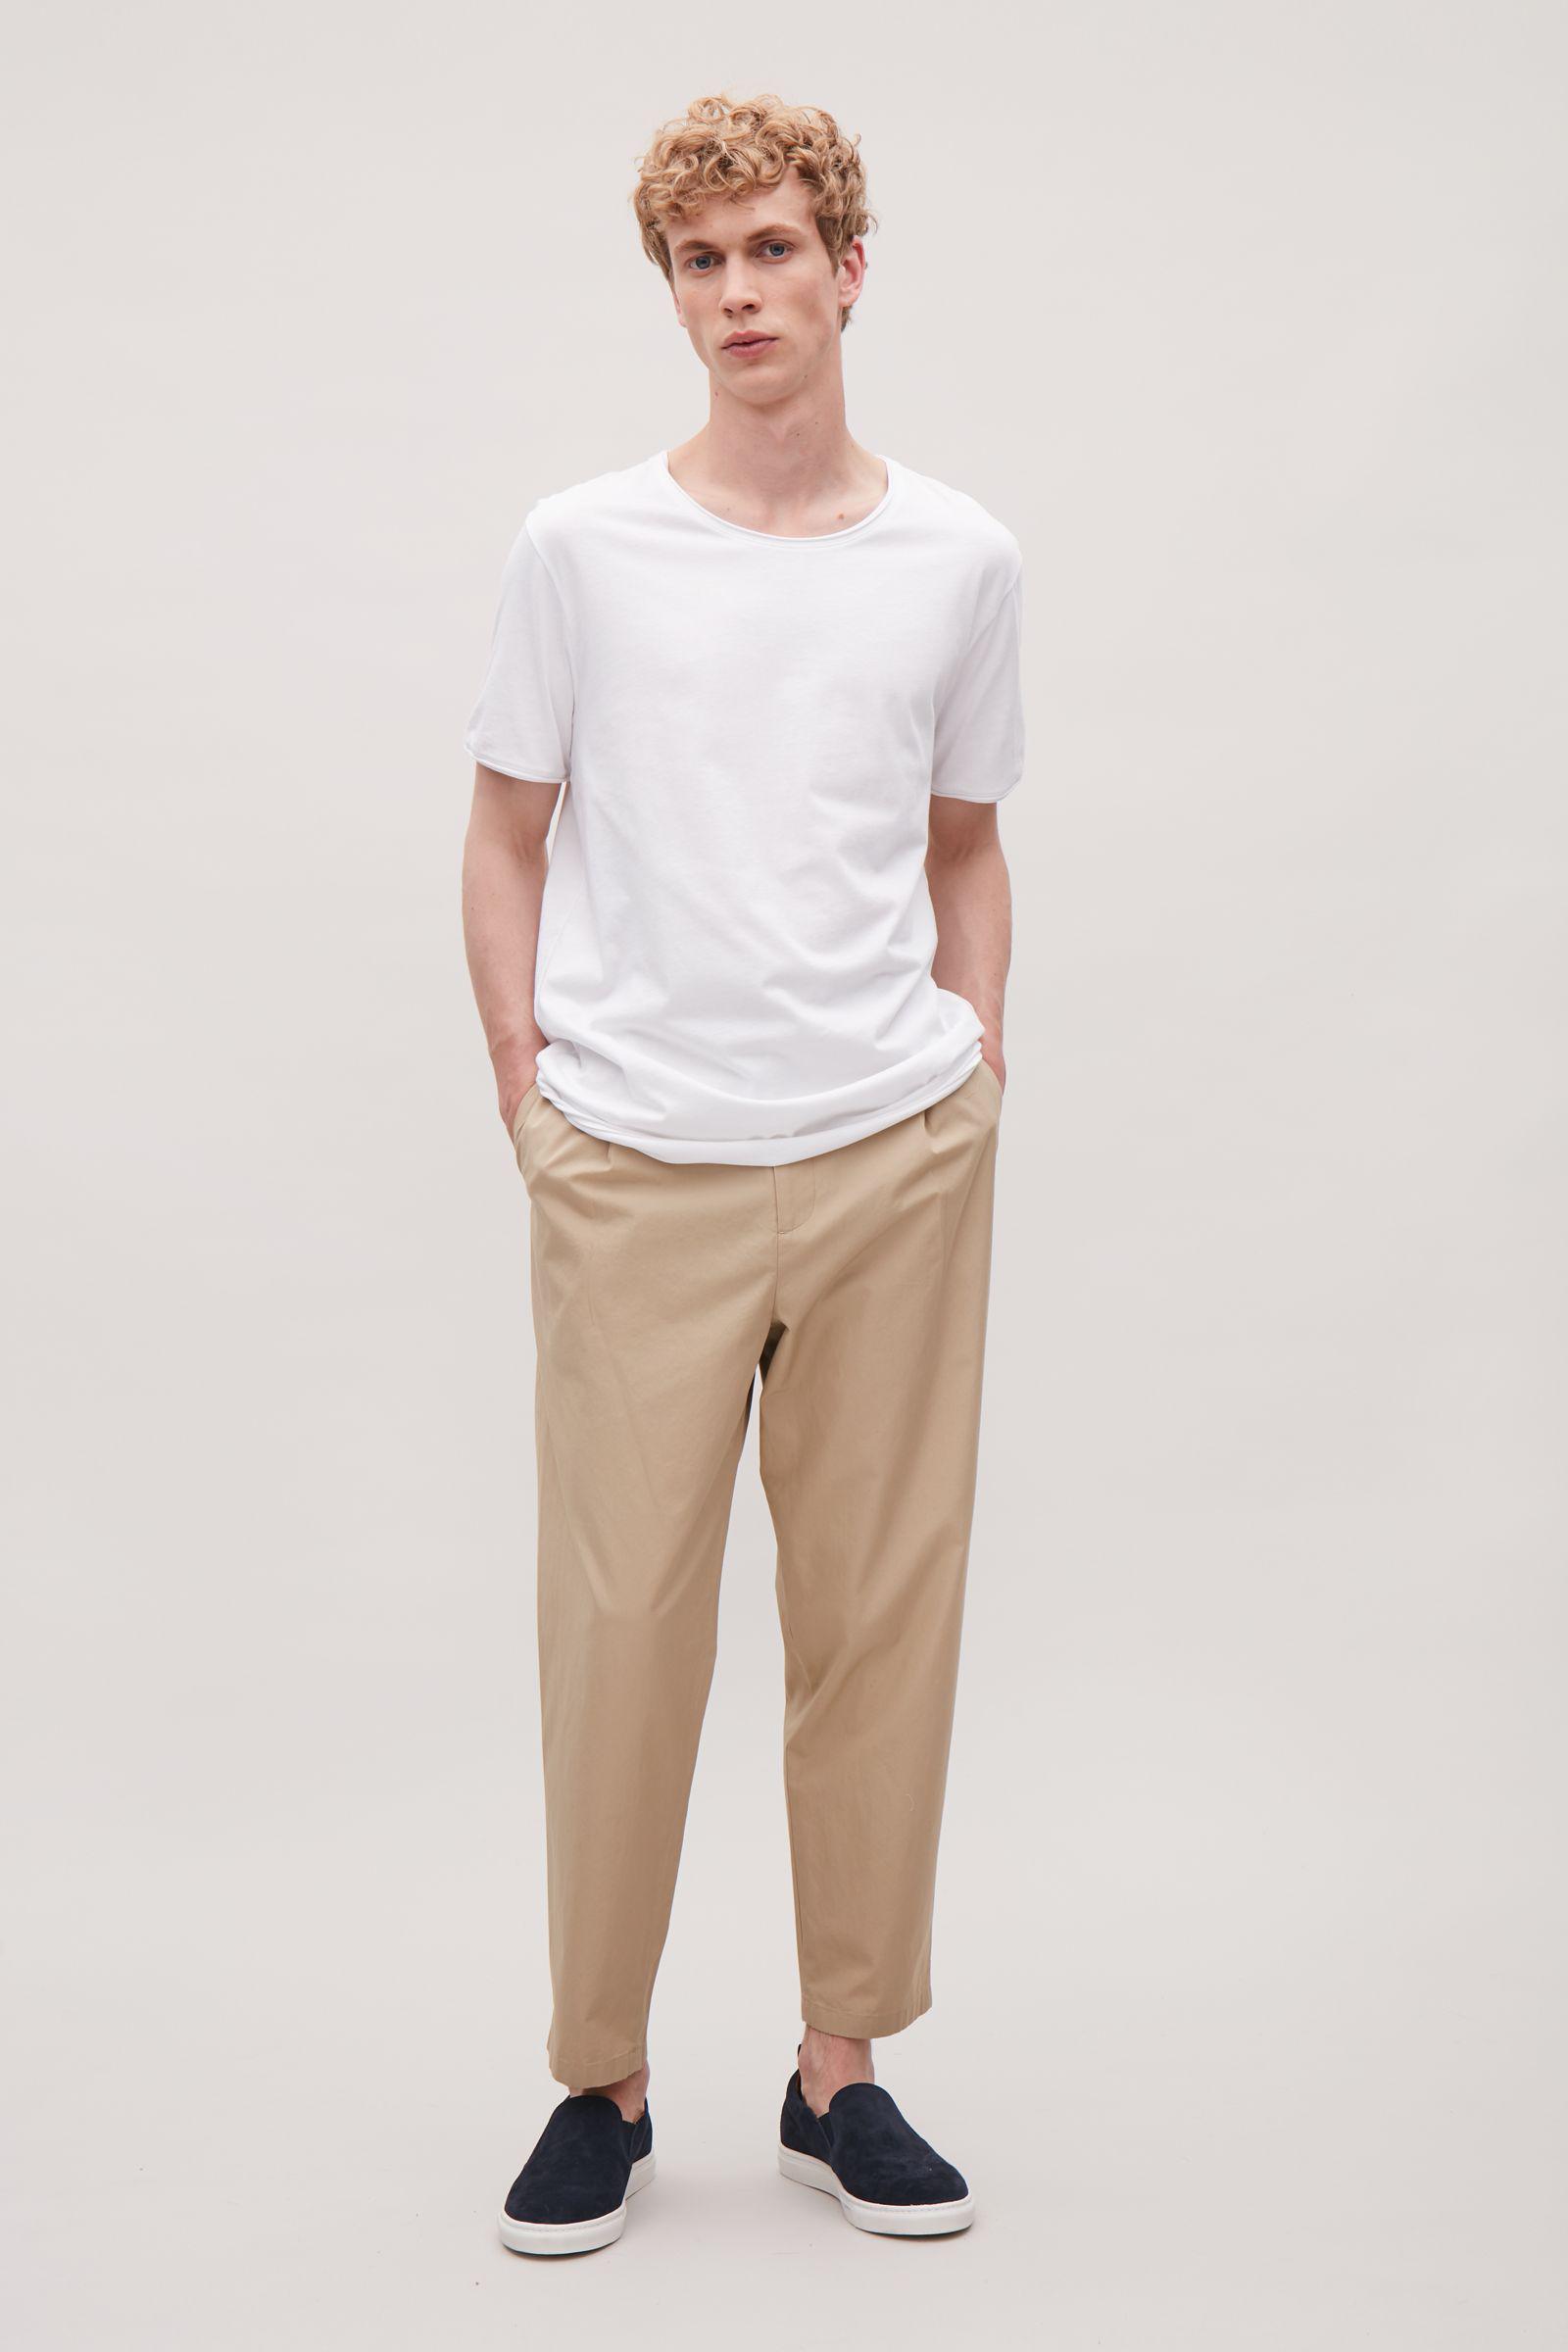 COS Cotton Rolled Edge T-shirt in White for Men | Lyst